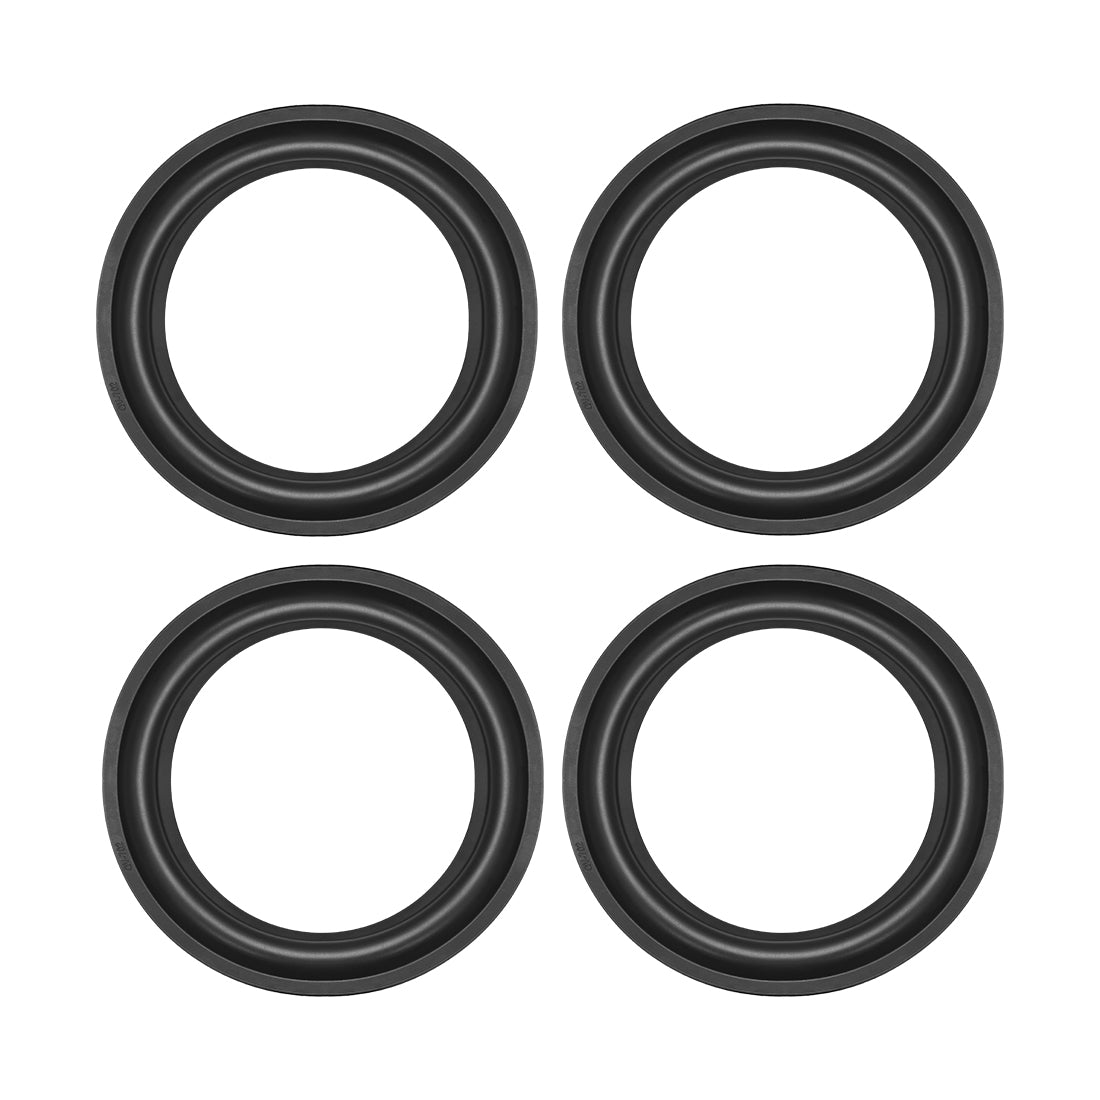 uxcell Uxcell 6.57" 6.57inch Speaker Rubber Edge Surround Rings Replacement Part for Speaker Repair or DIY 4pcs